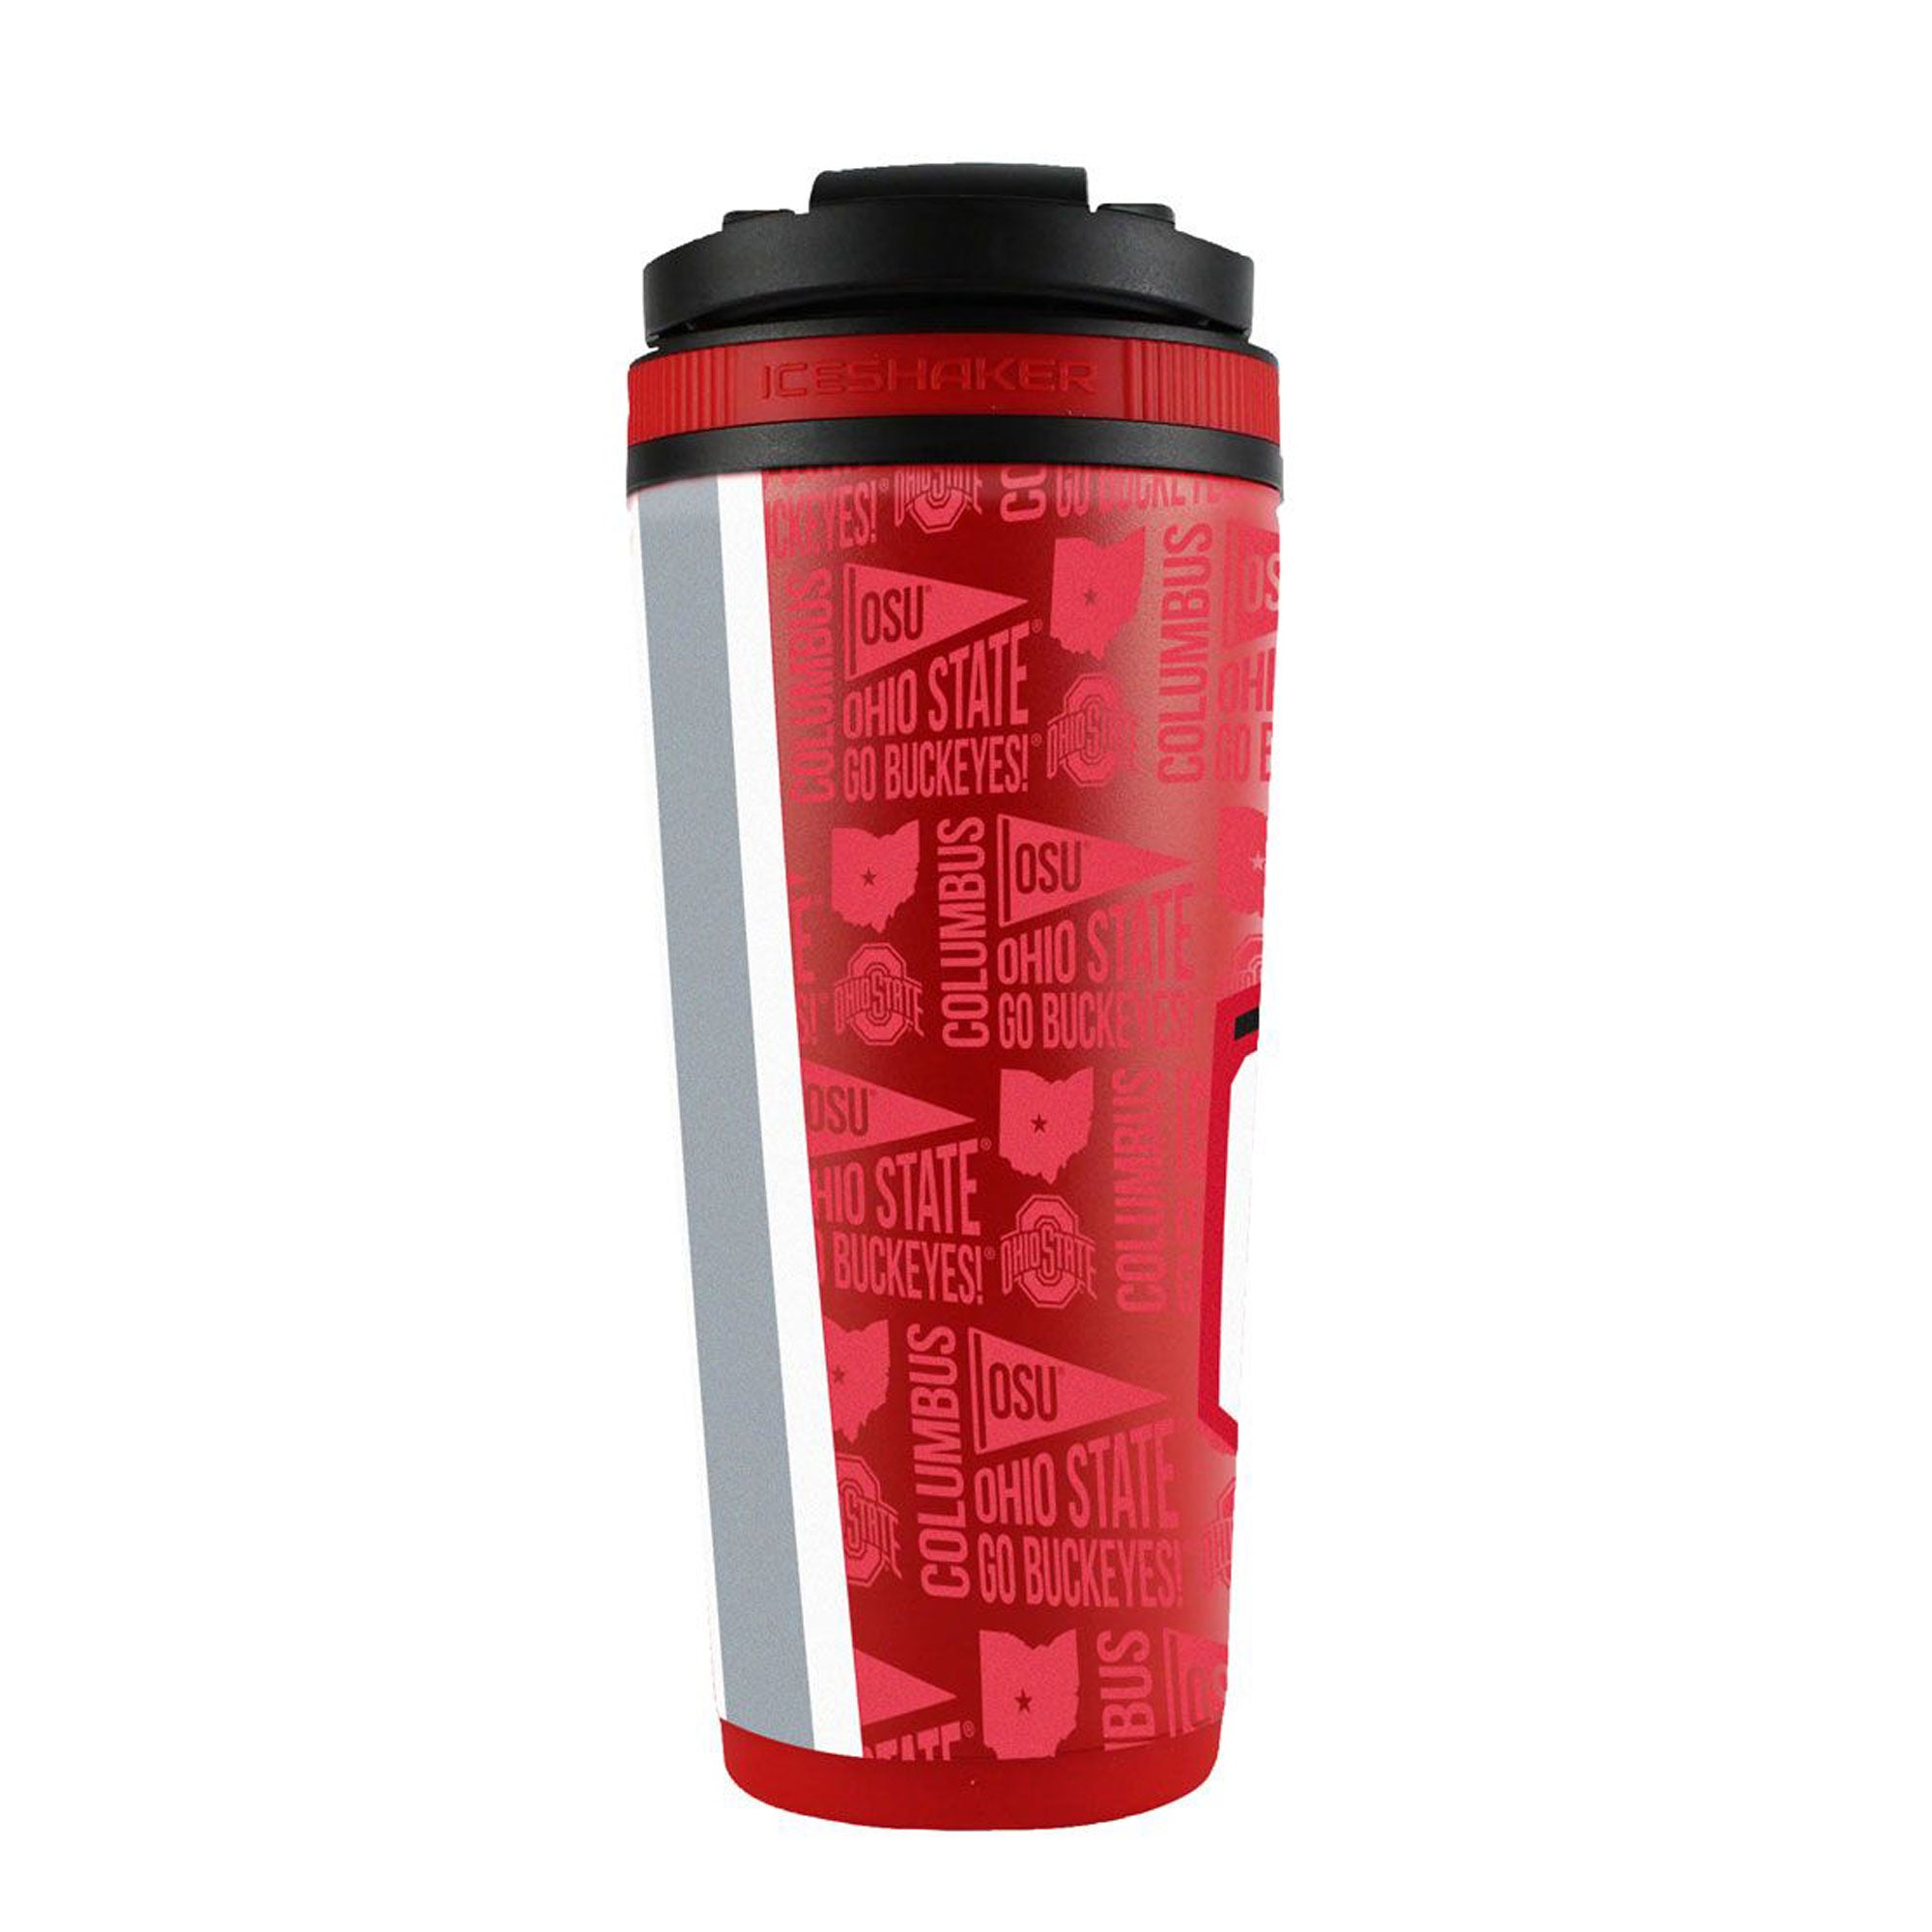 Officially Licensed Ohio State Buckeyes 4D Ice Shaker